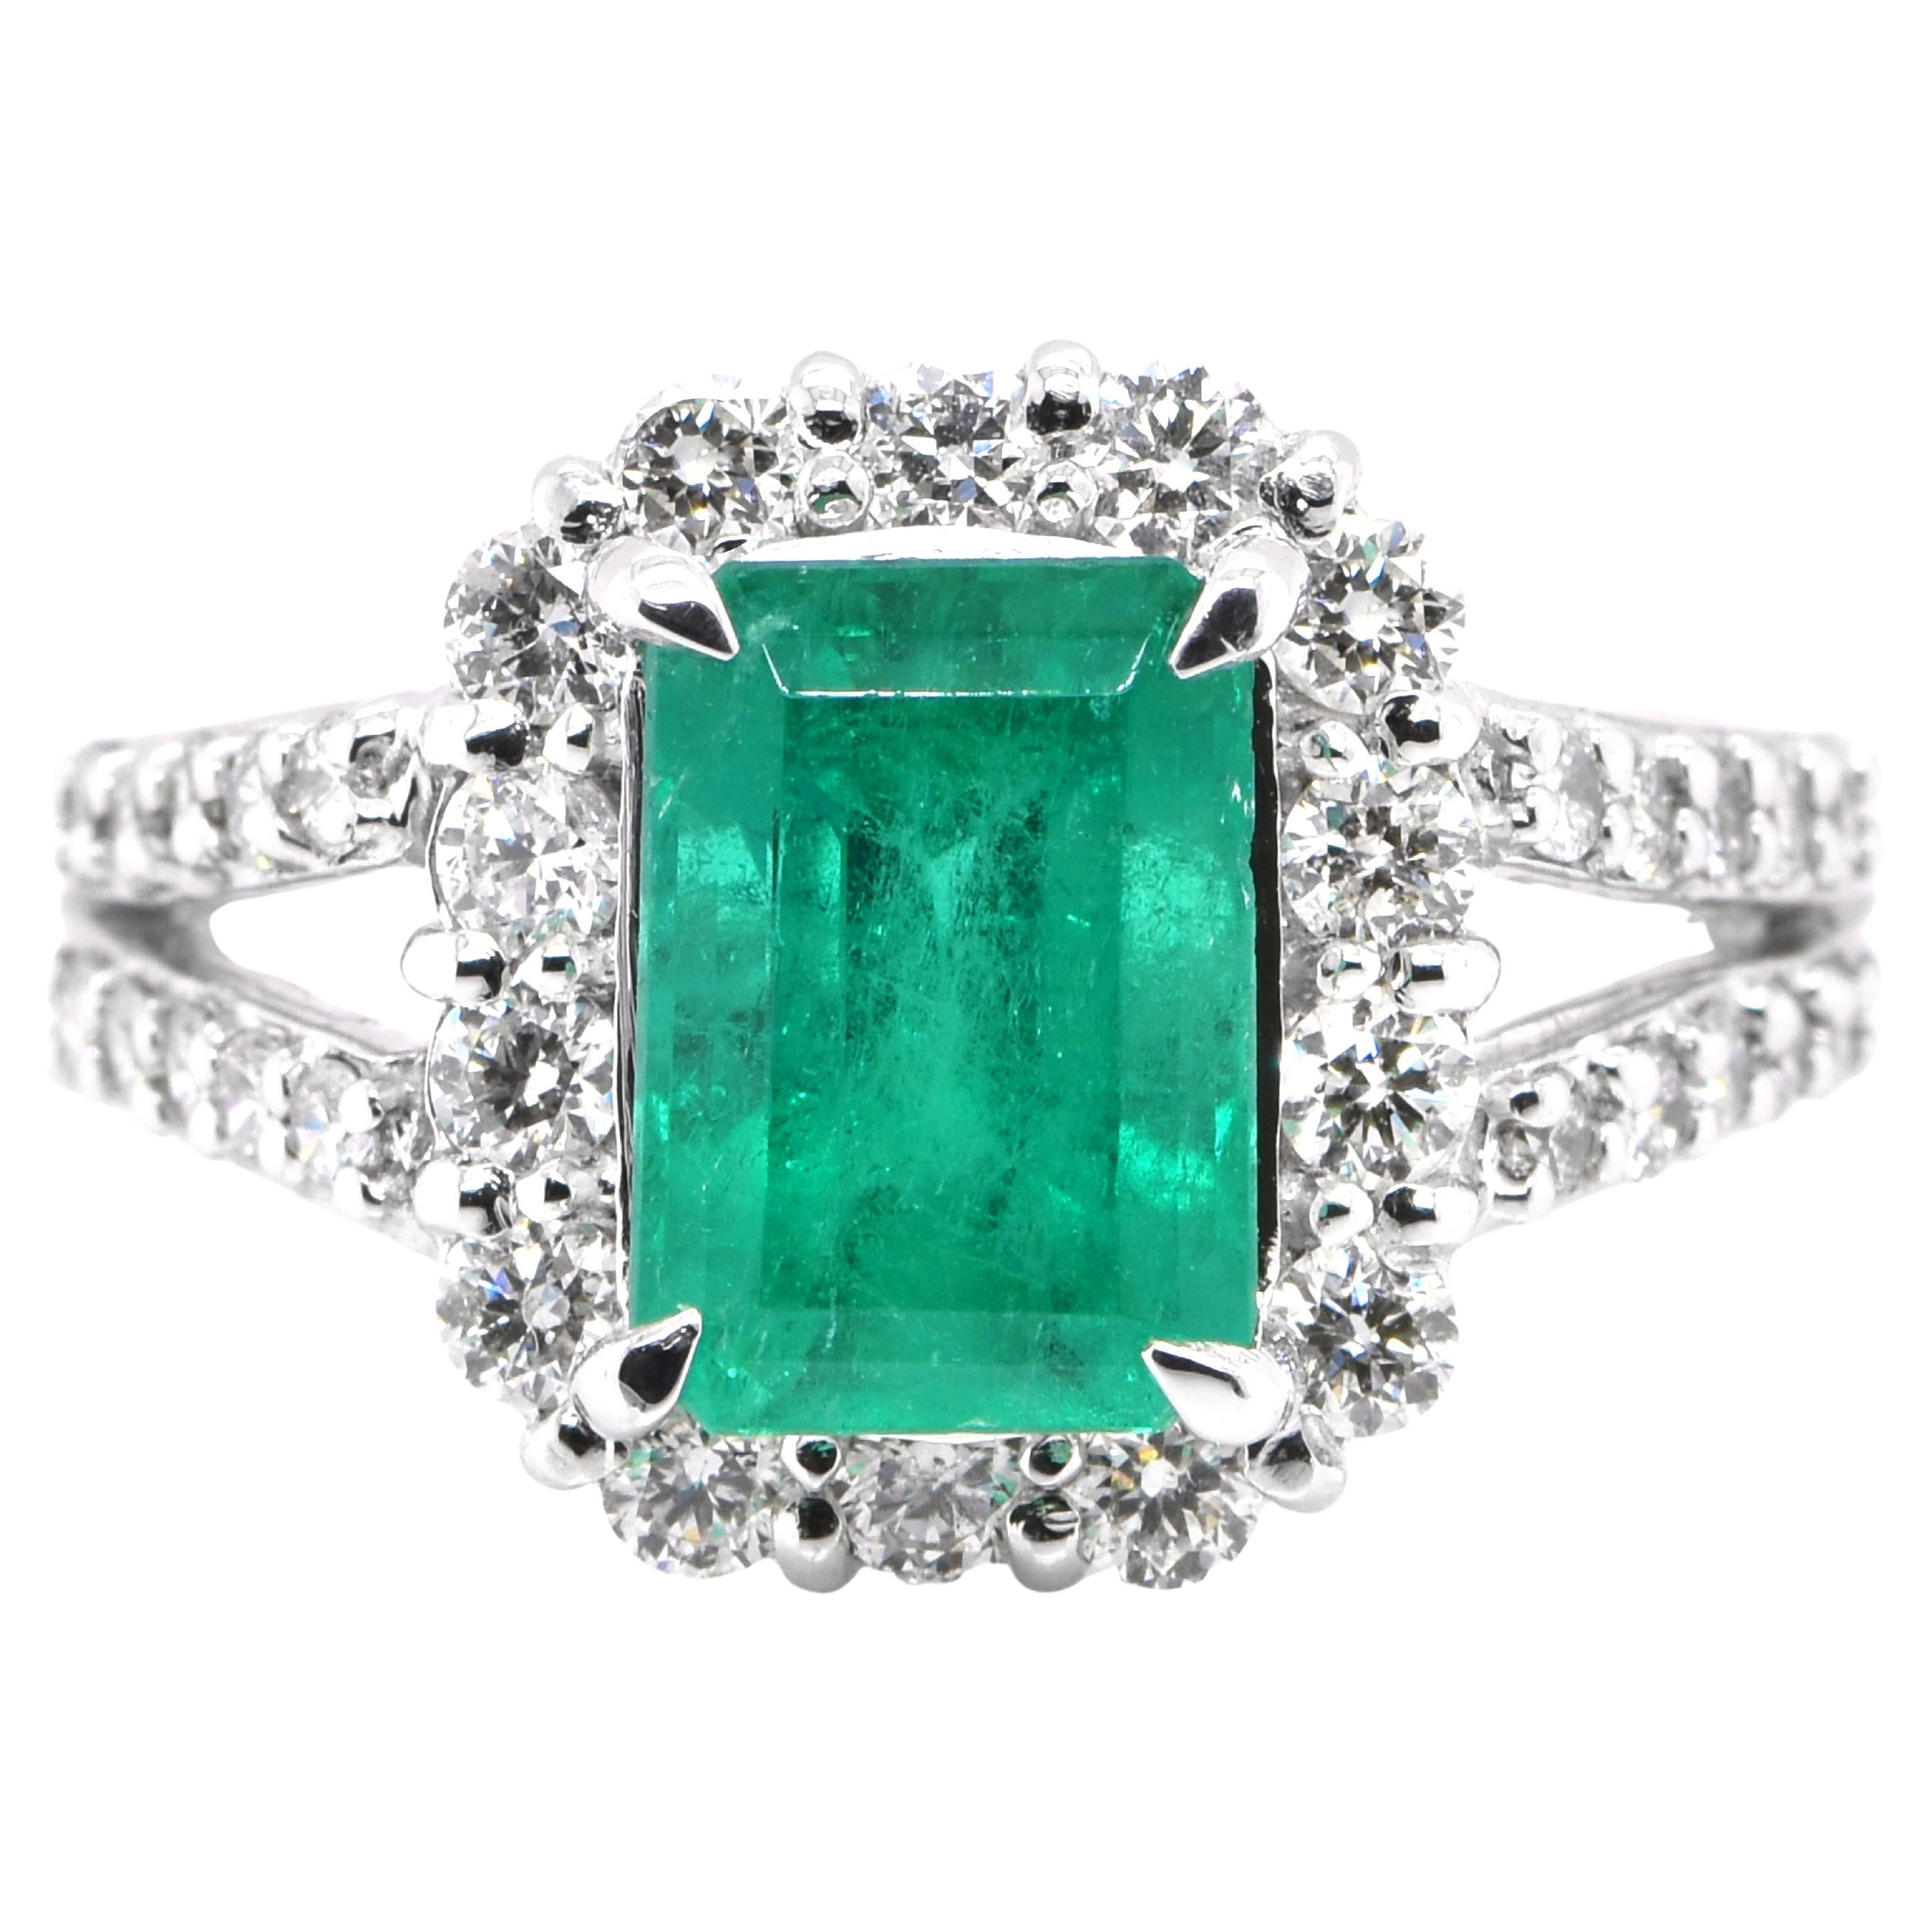 2.49 Carat Colombian Emerald and Diamond Ring Set in Platinum For Sale